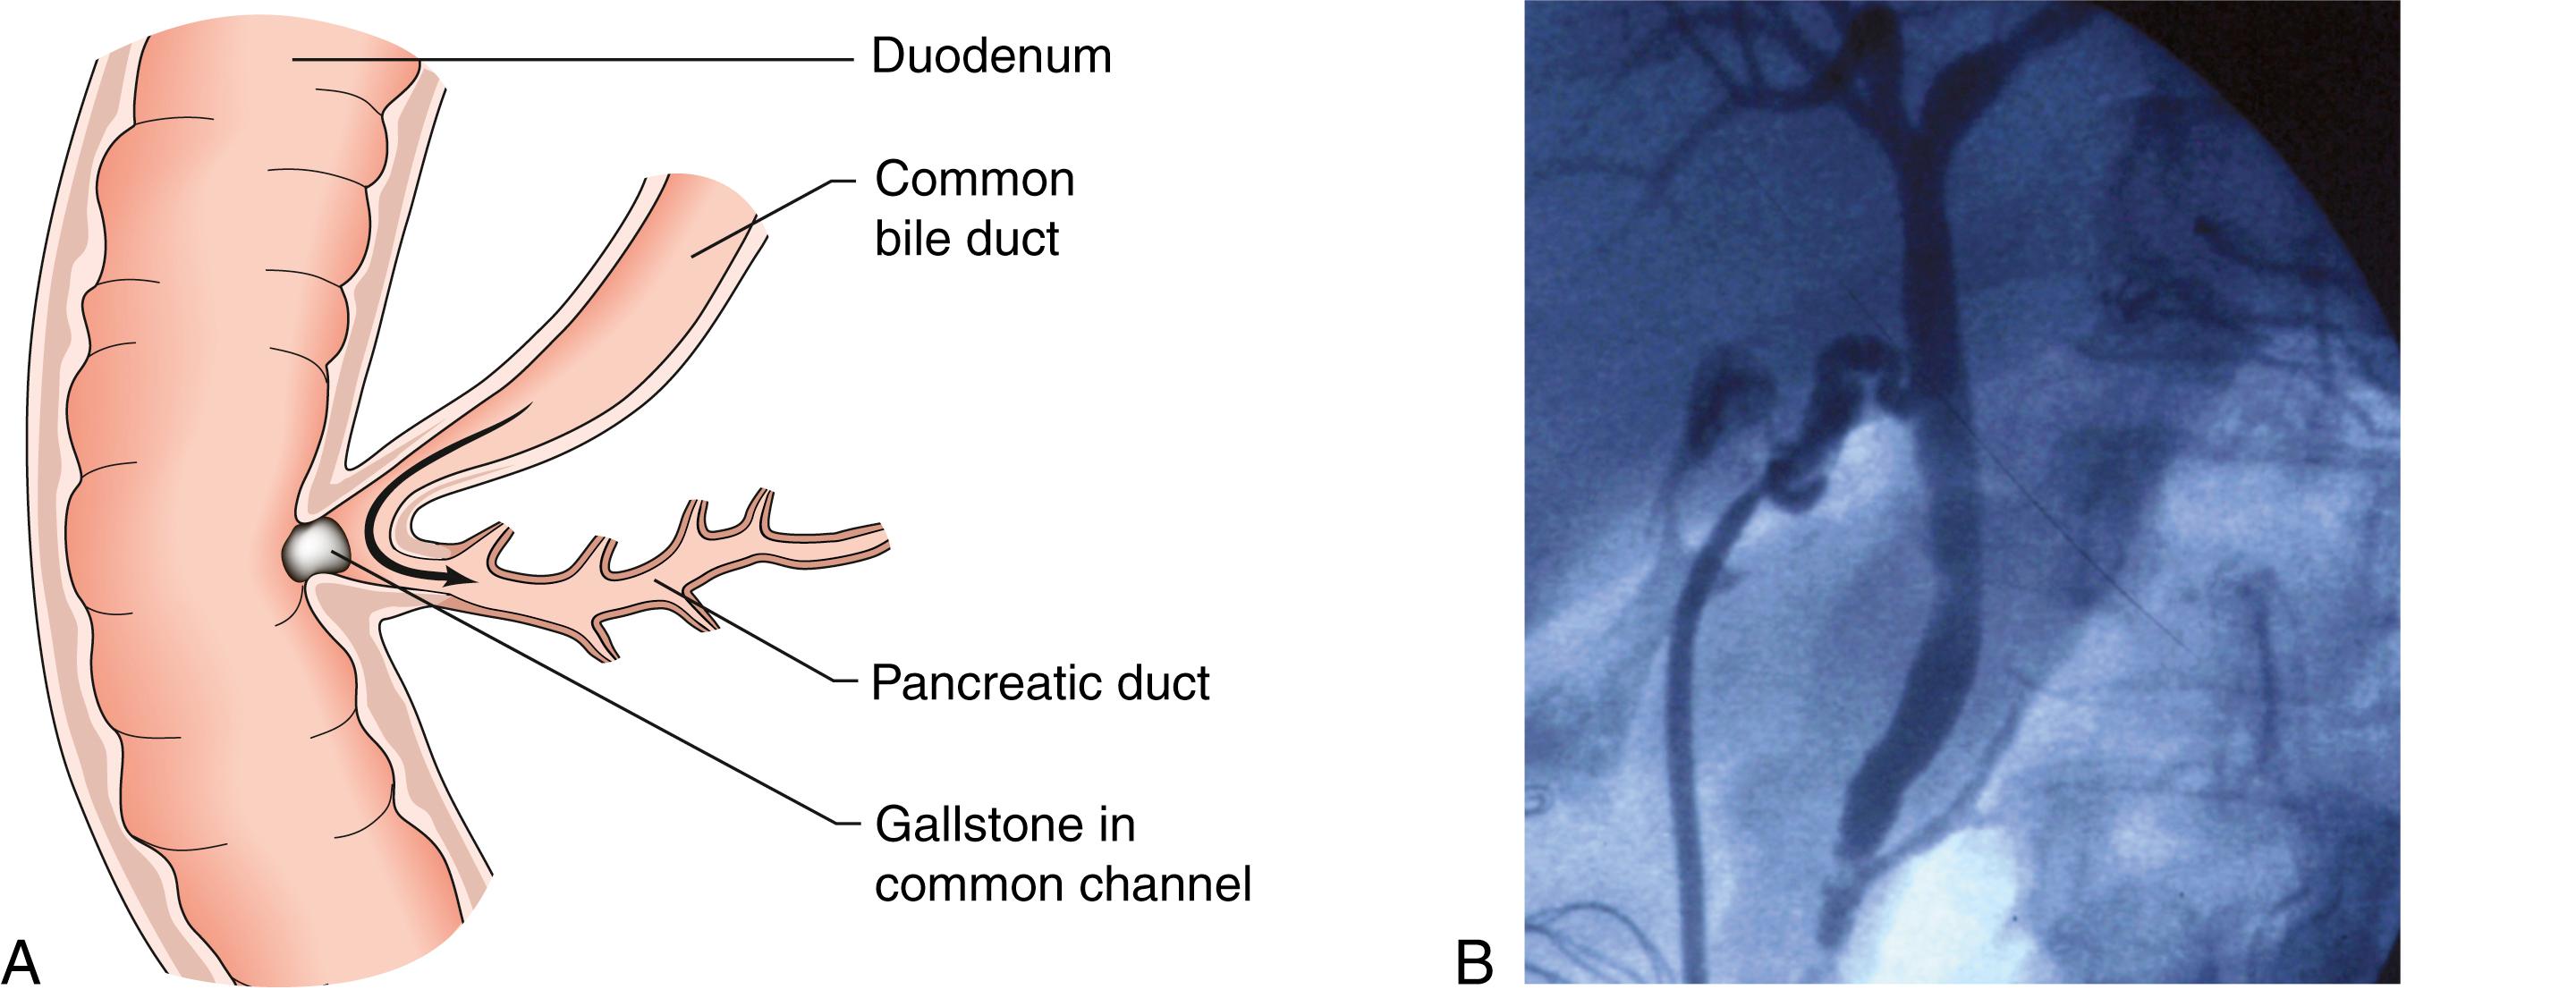 Fig. 16.3, (A) Common channel shared by the bile duct and the pancreatic duct may allow gallstone pancreatitis. (B) Operative cholangiogram showing a stone in the distal common bile duct and reflux of contrast into the pancreatic duct.